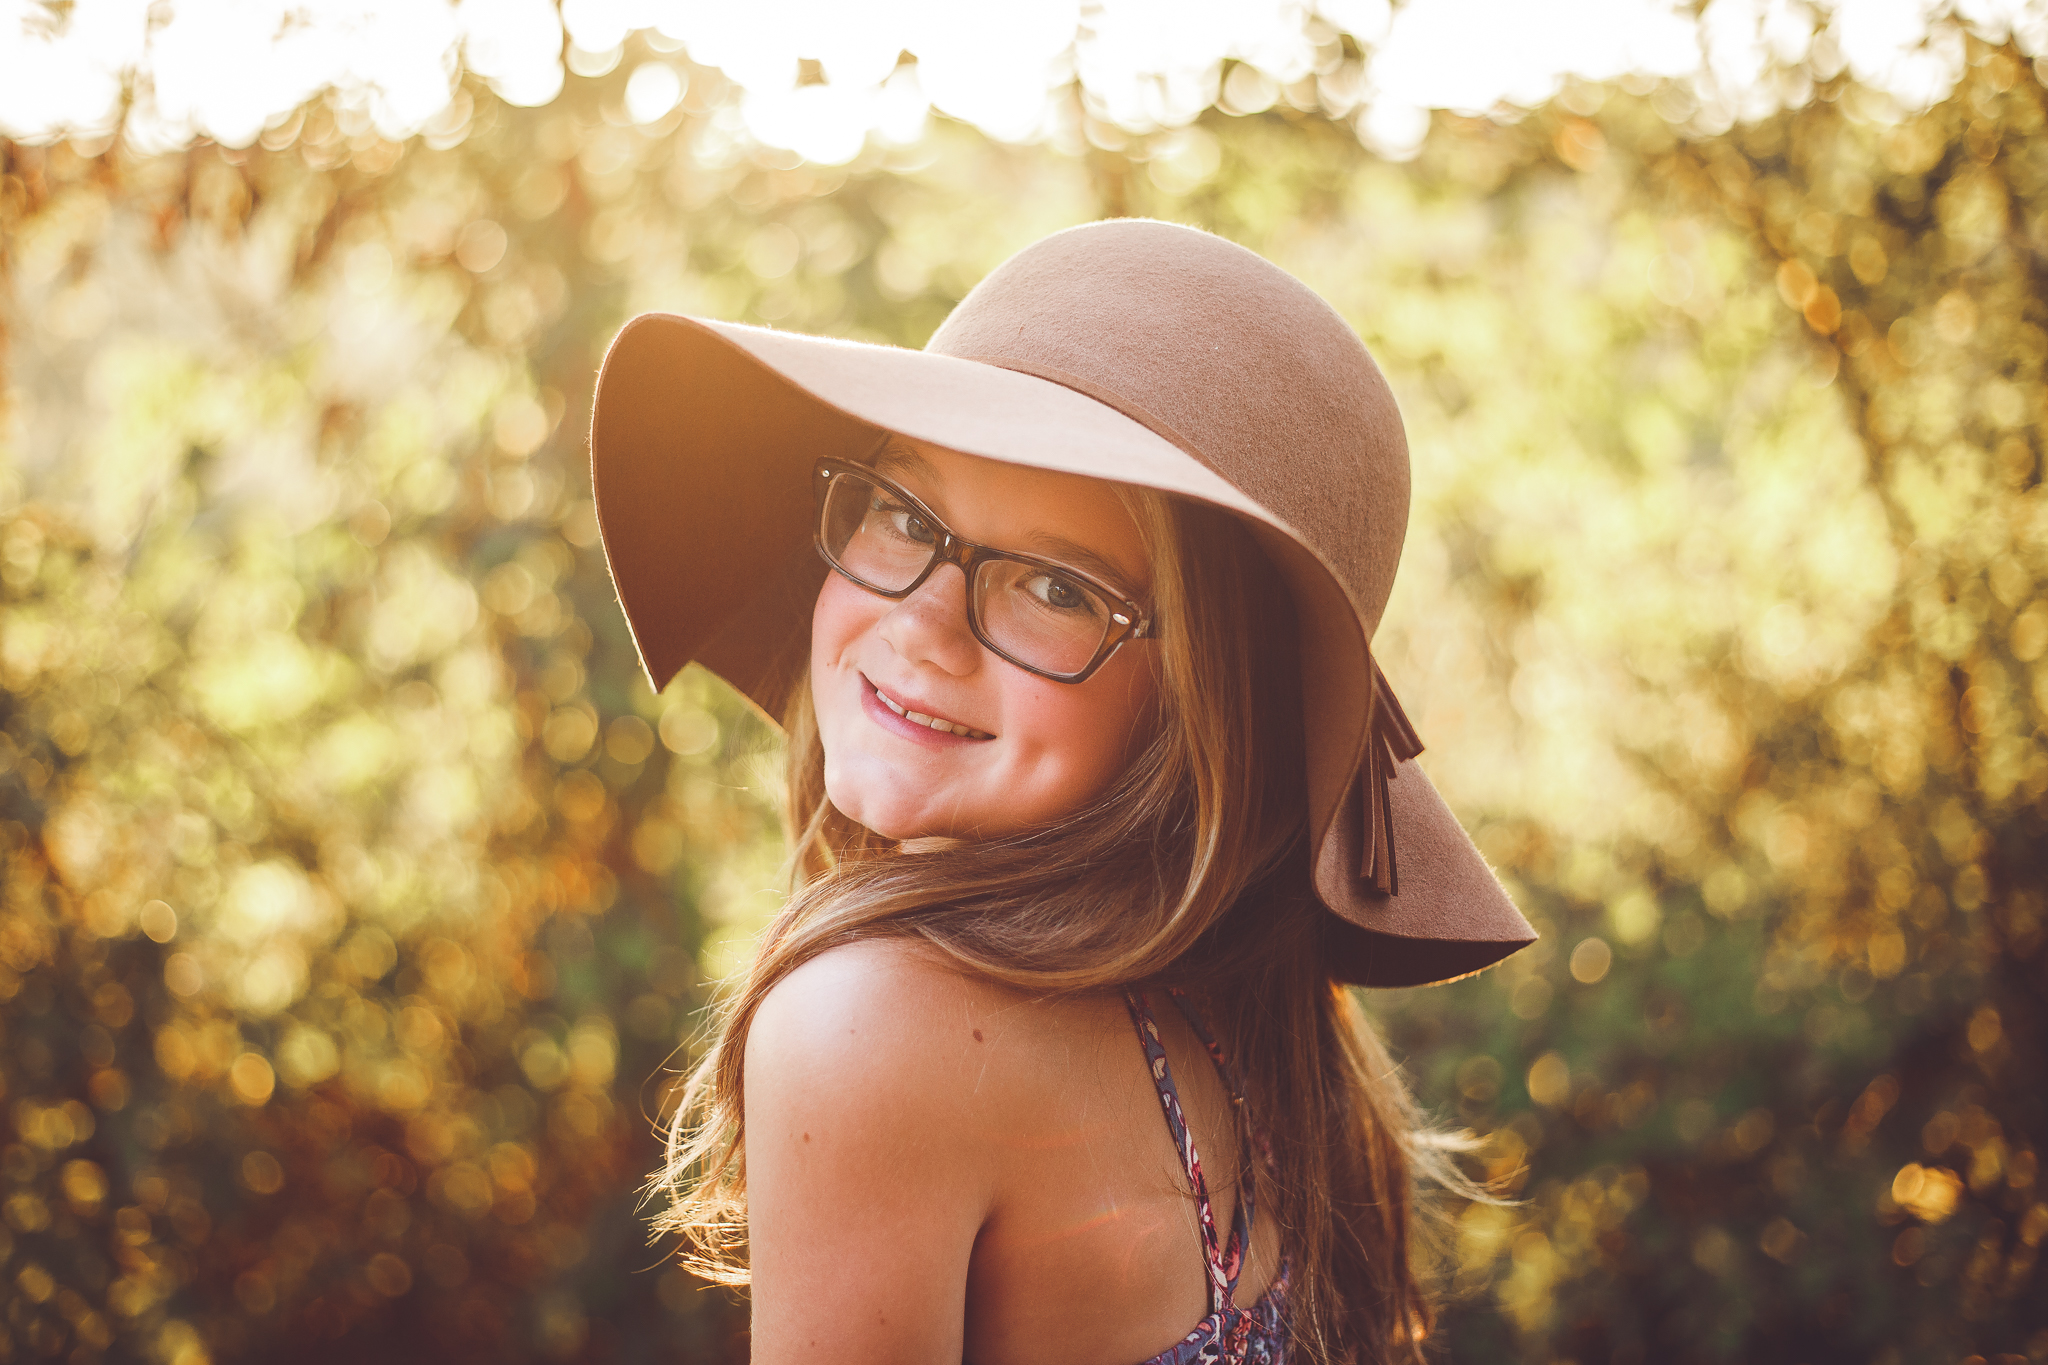 A very cute young girl looks back at the camera and smiles and dimples, wearing a hat in this child photography by L+R Photography from Tulsa , Oklahoma